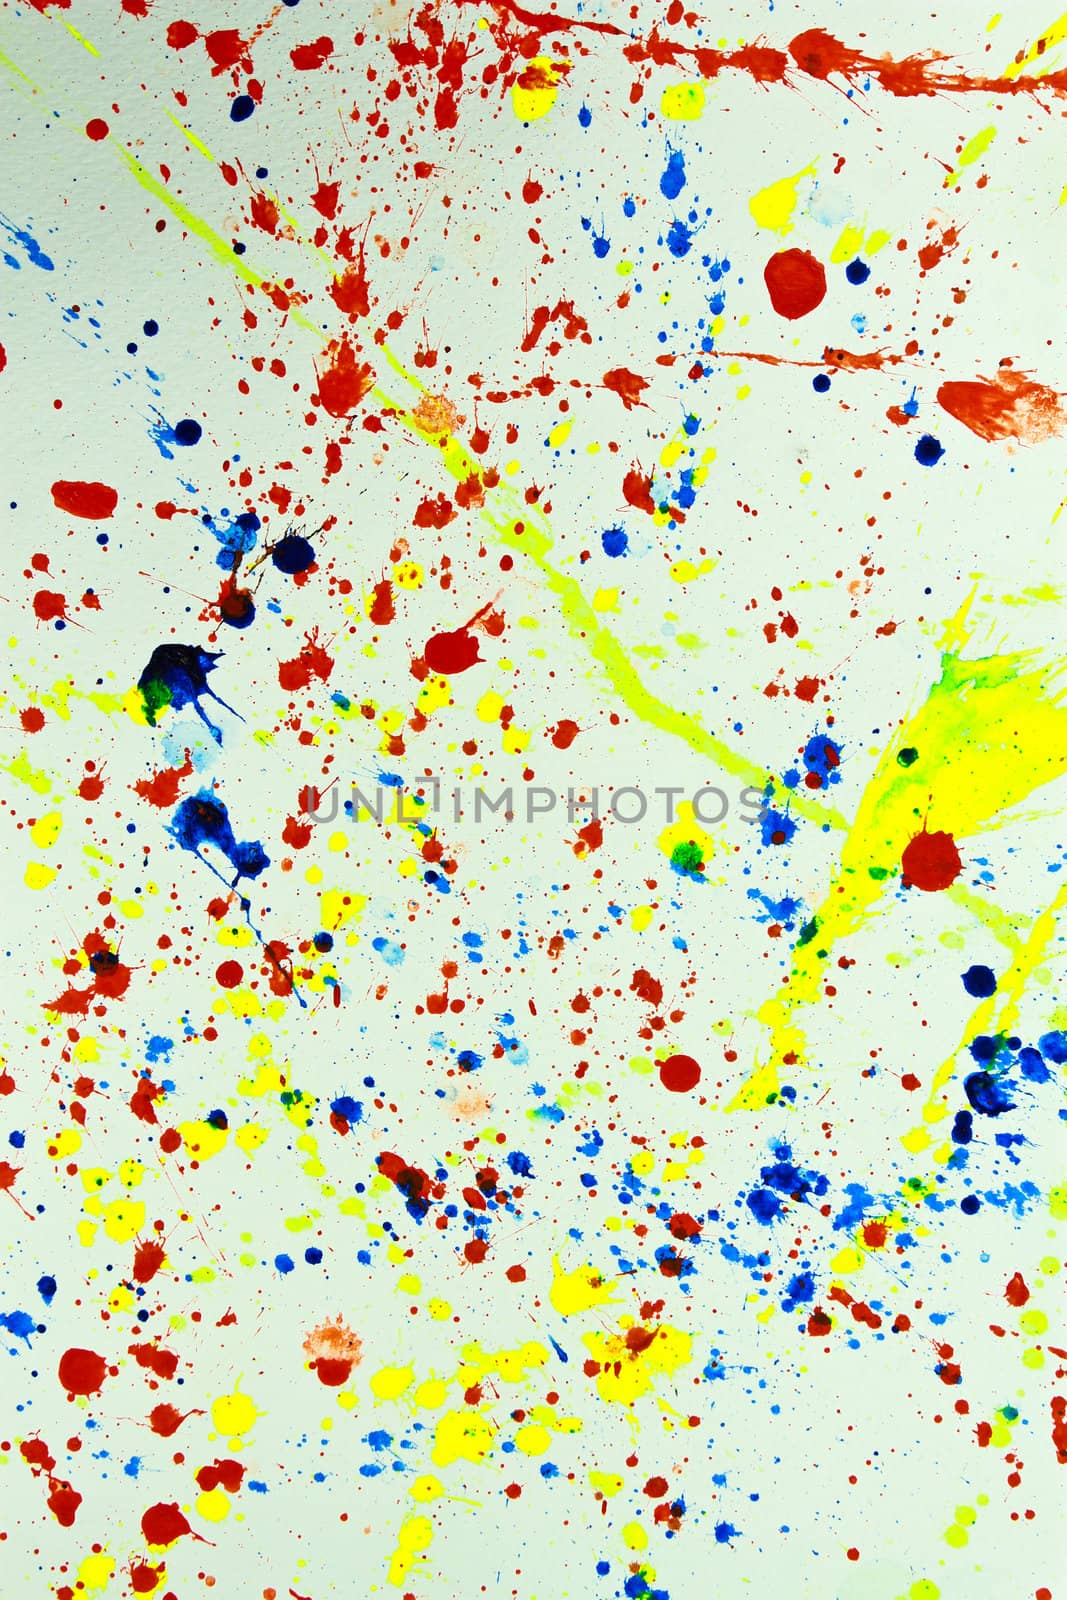 An abstract water-coloured painted blot







An abstract water-coloured painted blot